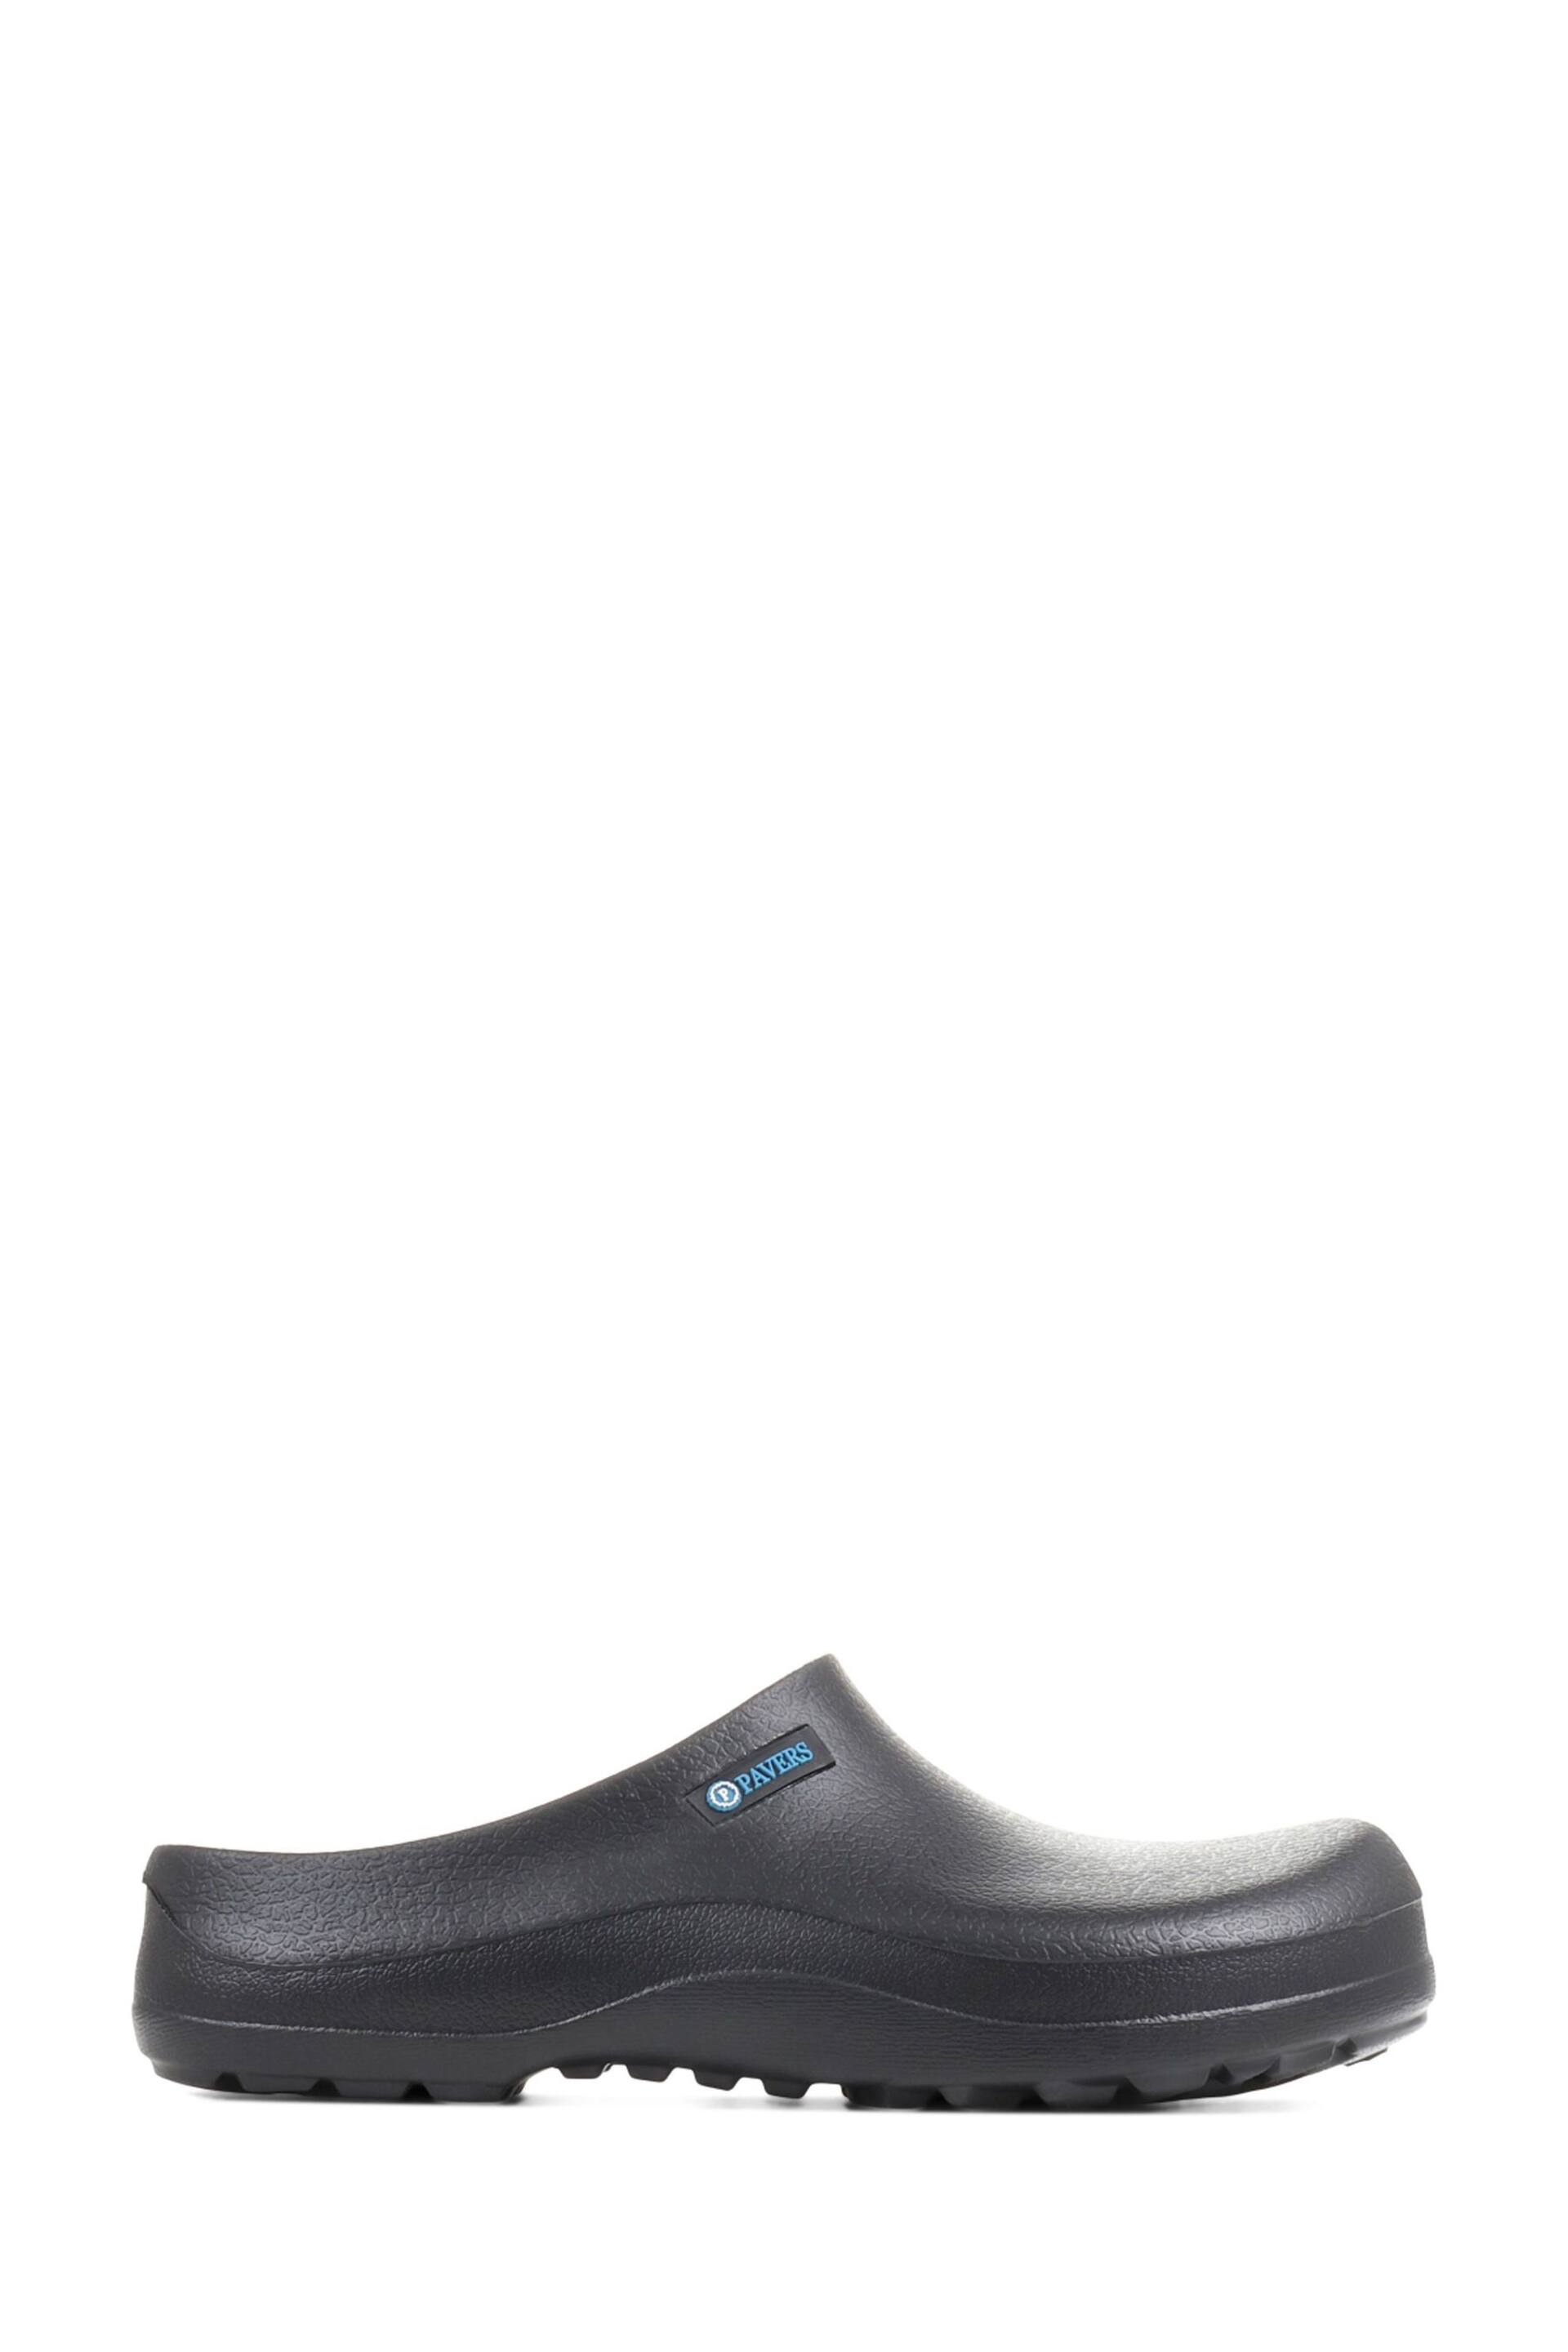 Pavers Black Welly Clogs - Image 1 of 5